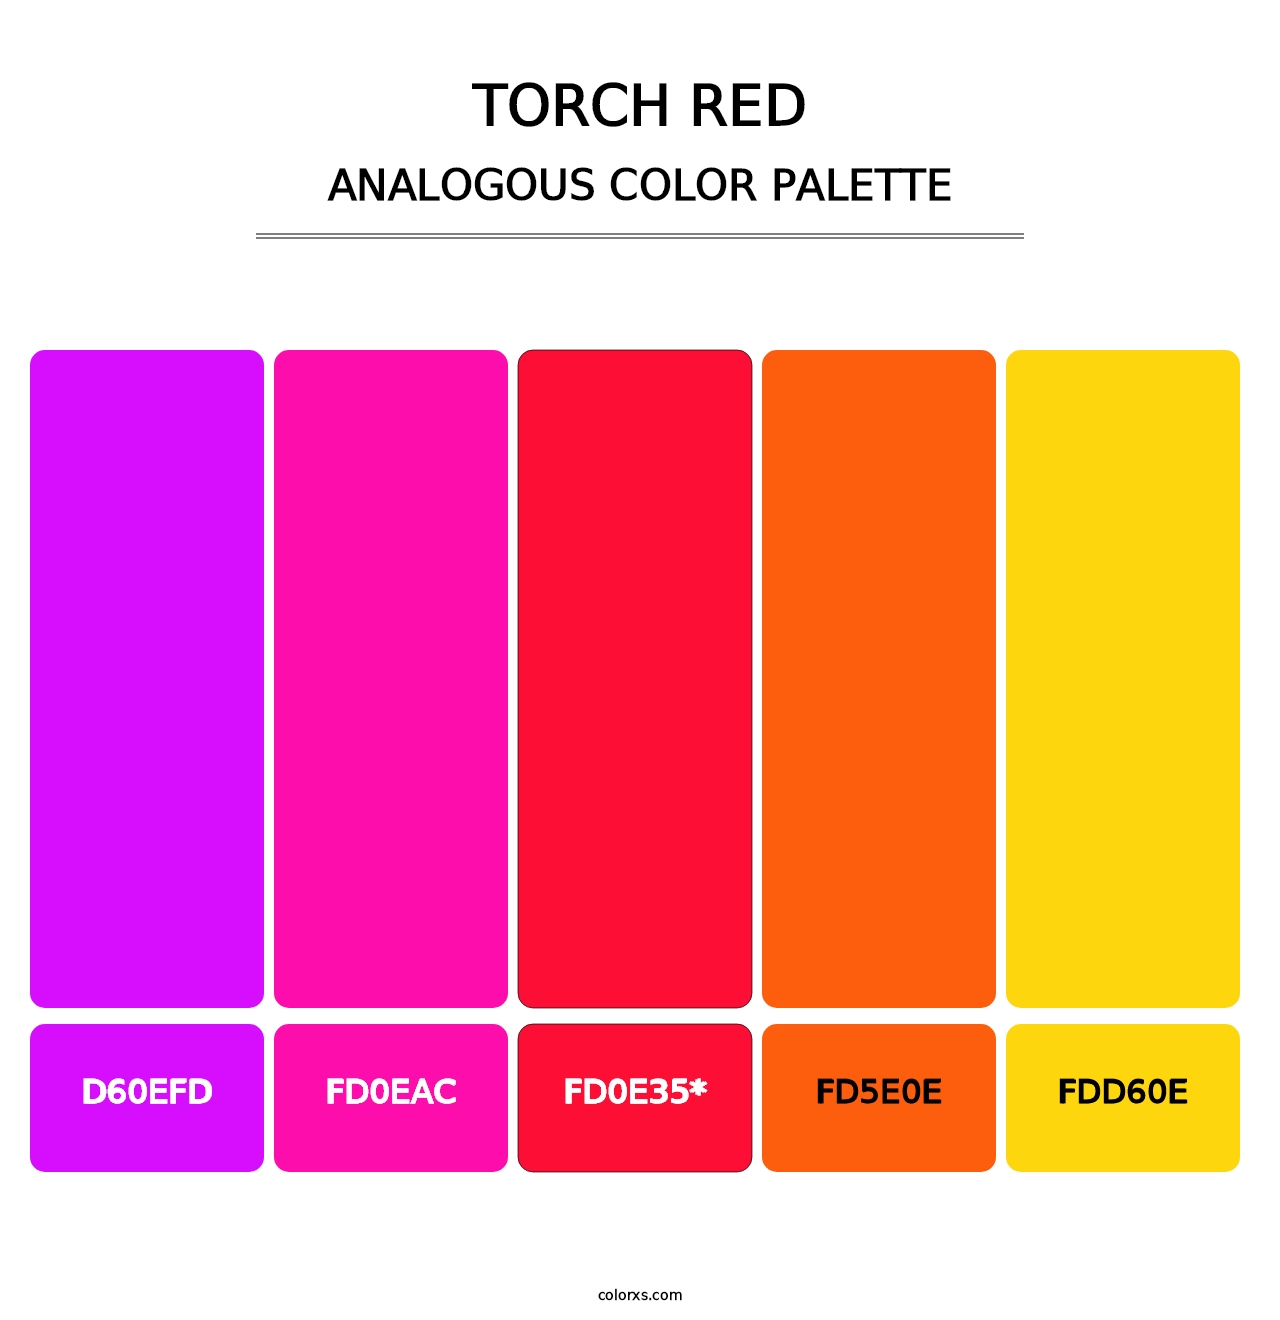 Torch Red - Analogous Color Palette